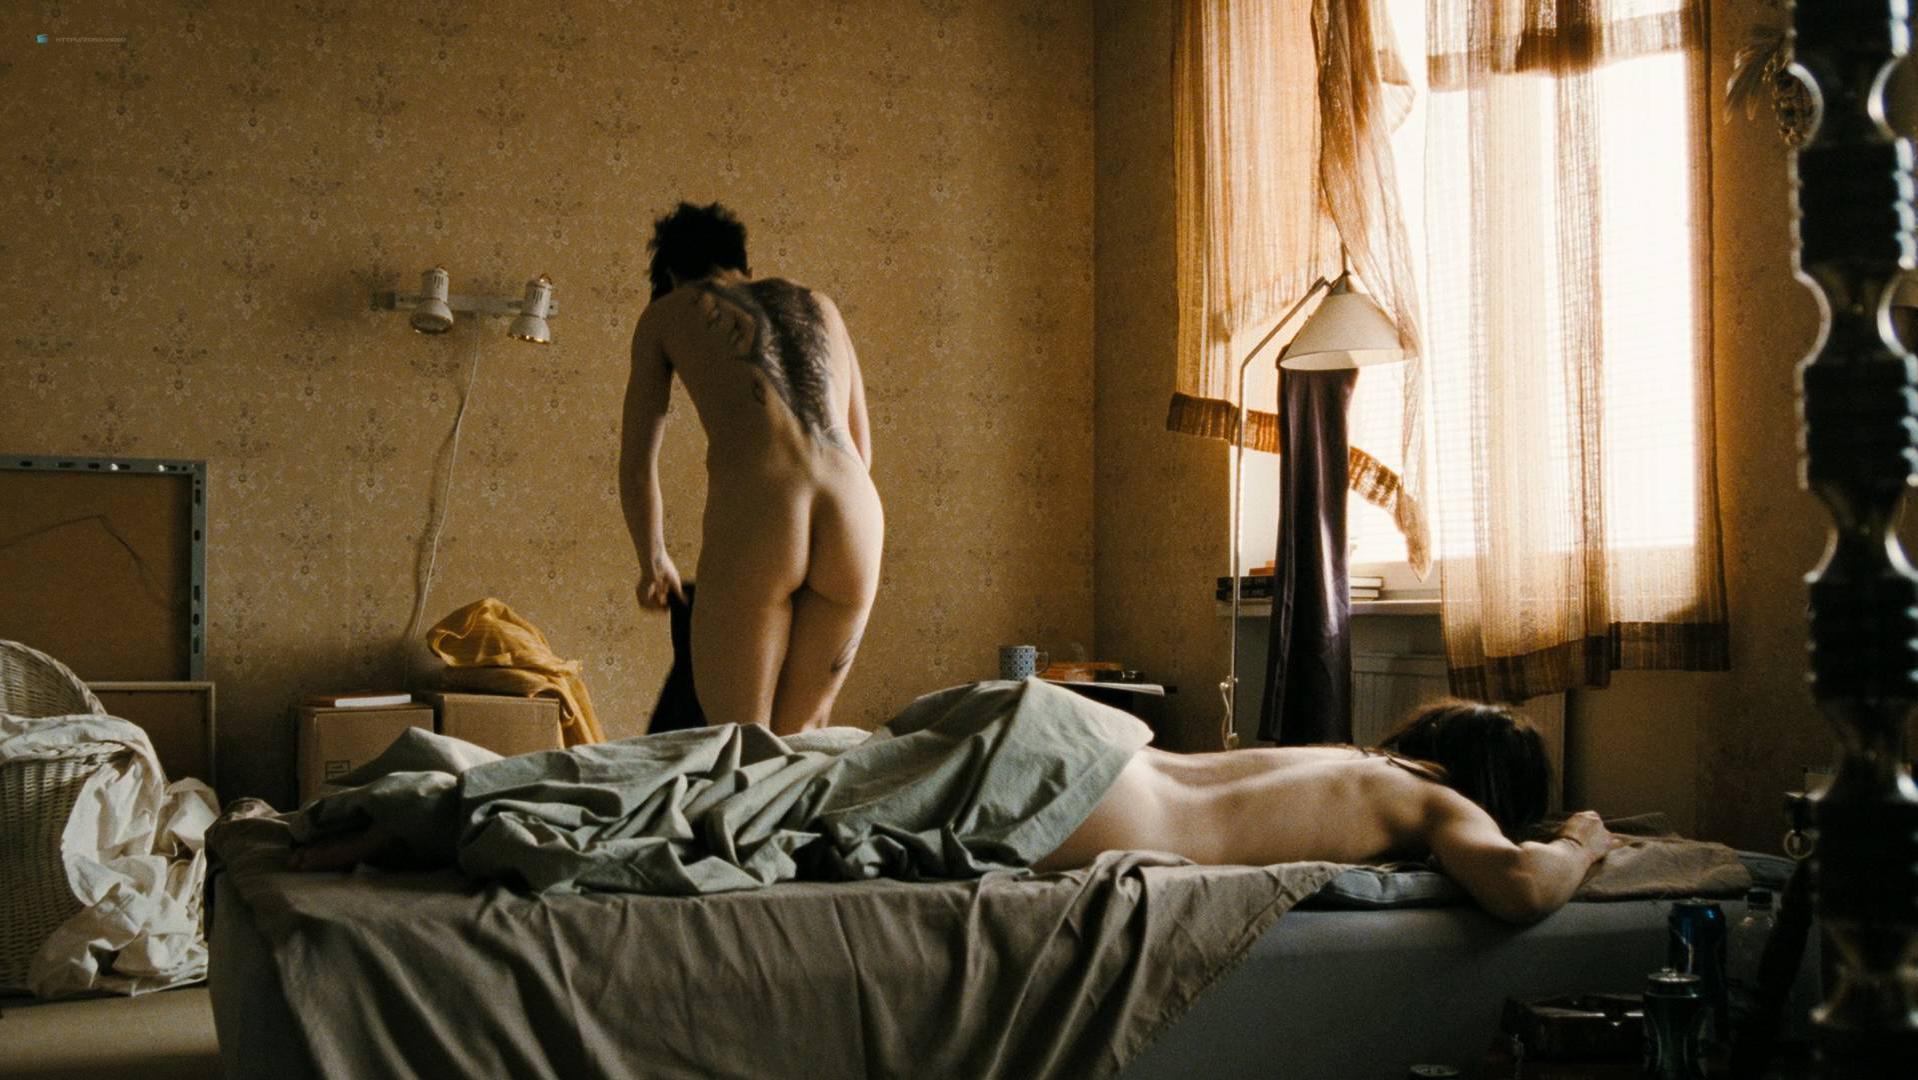 Topless noomi rapace noomi rapace